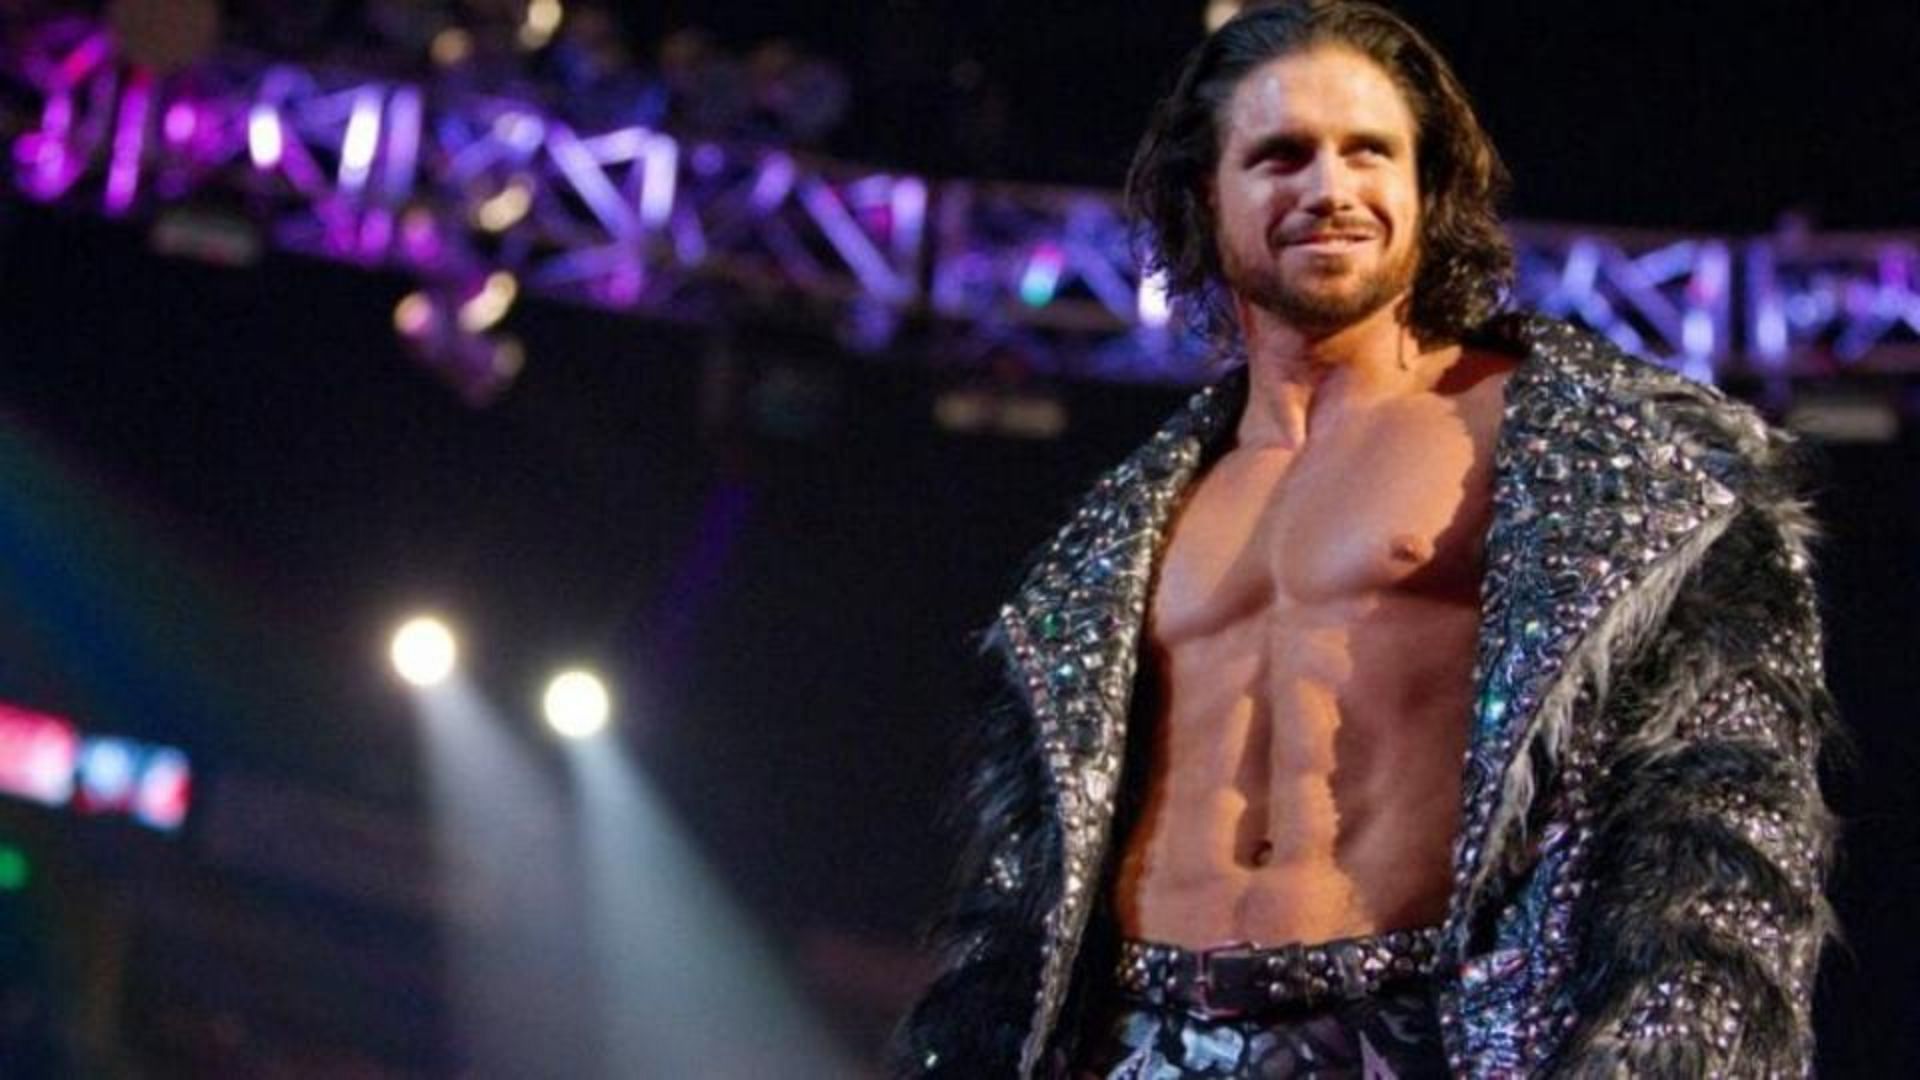 Despite returning to the company in 2020, John Morrison was released a year later